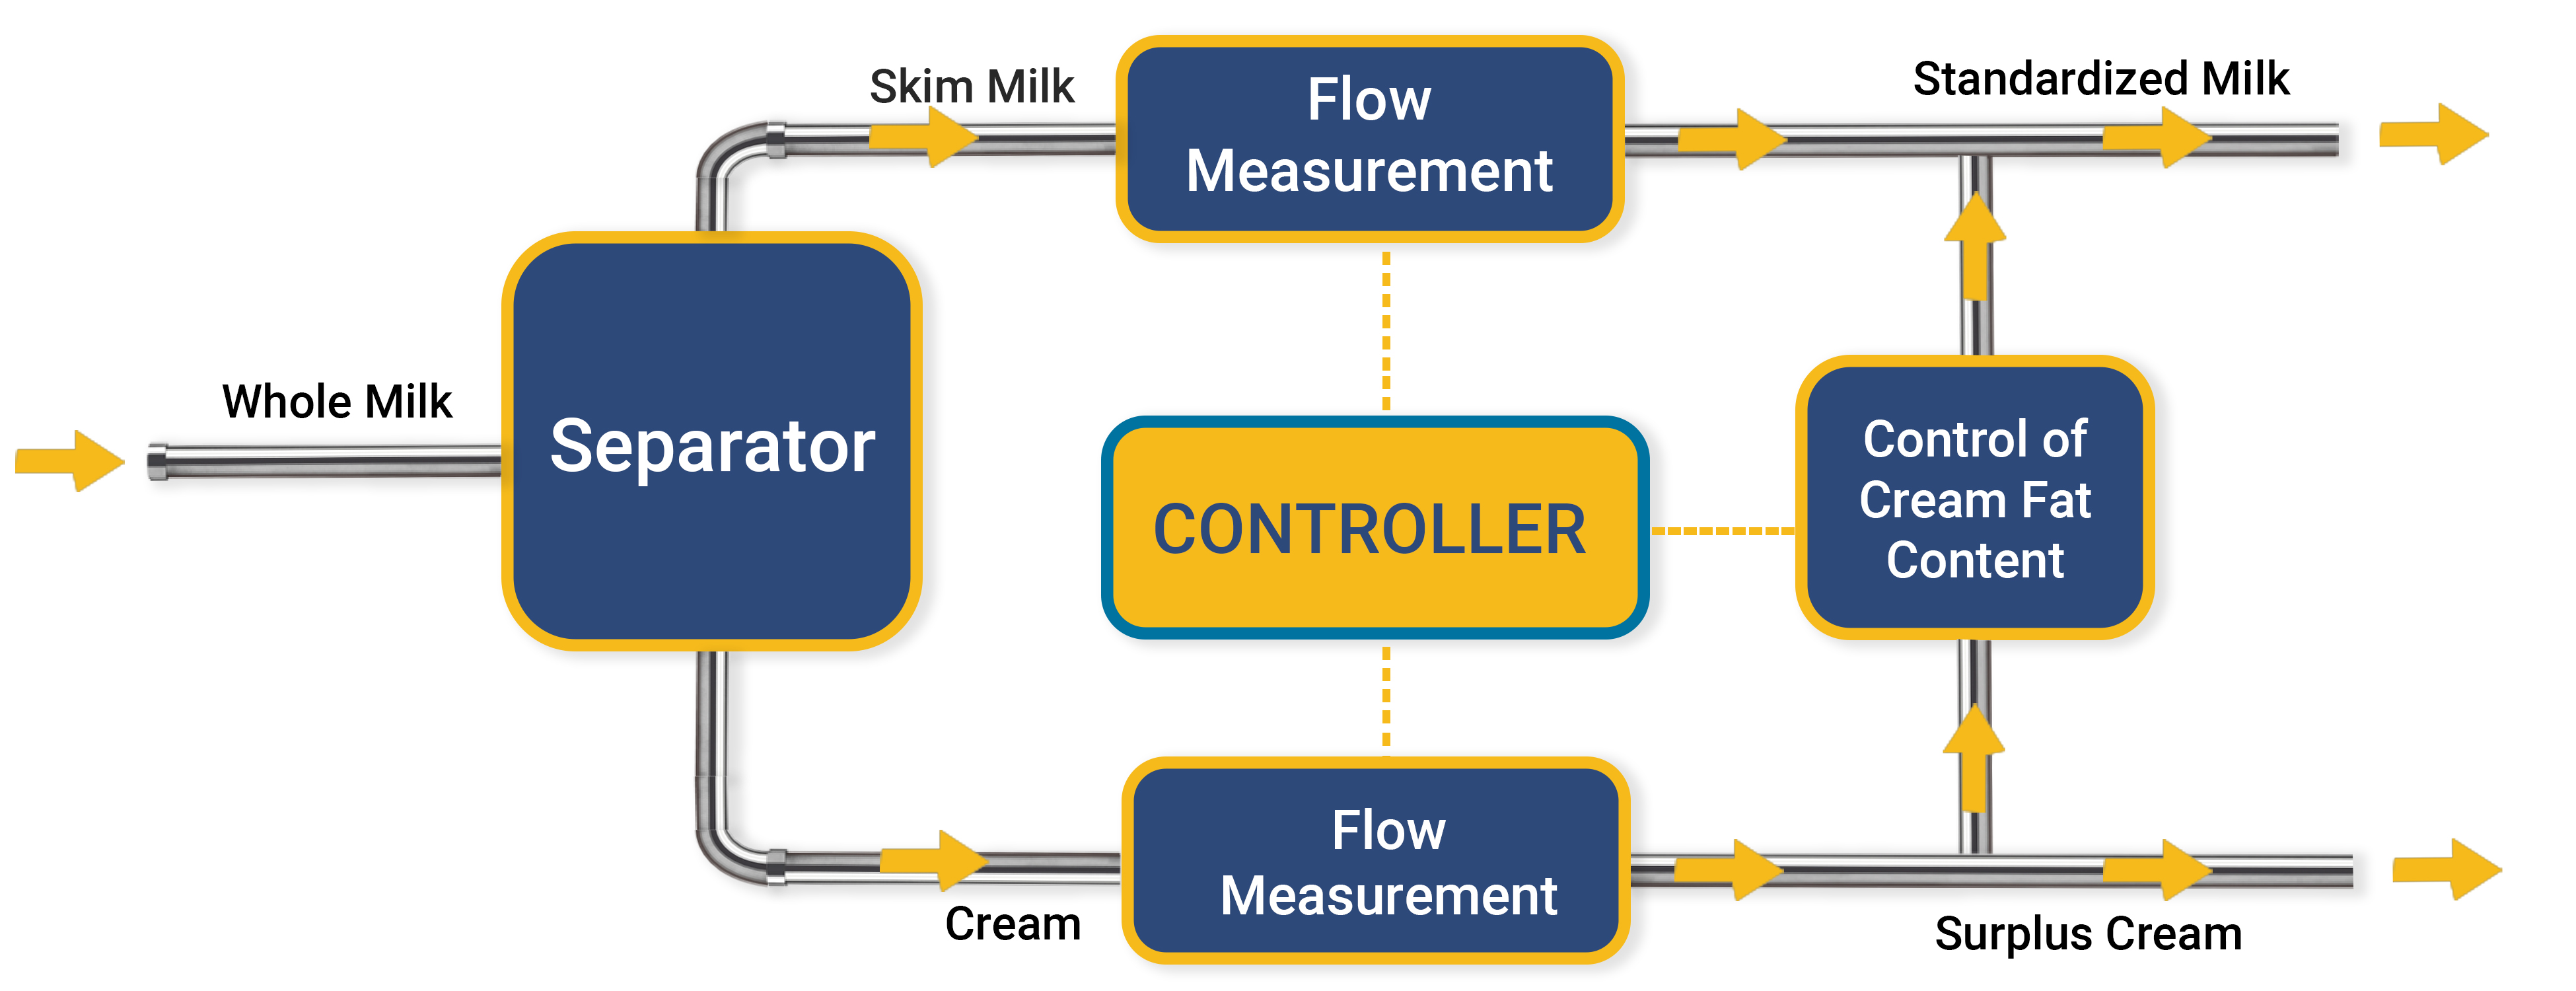 a continuous automatic milk fat standardization system using a closed-loop feedback control system